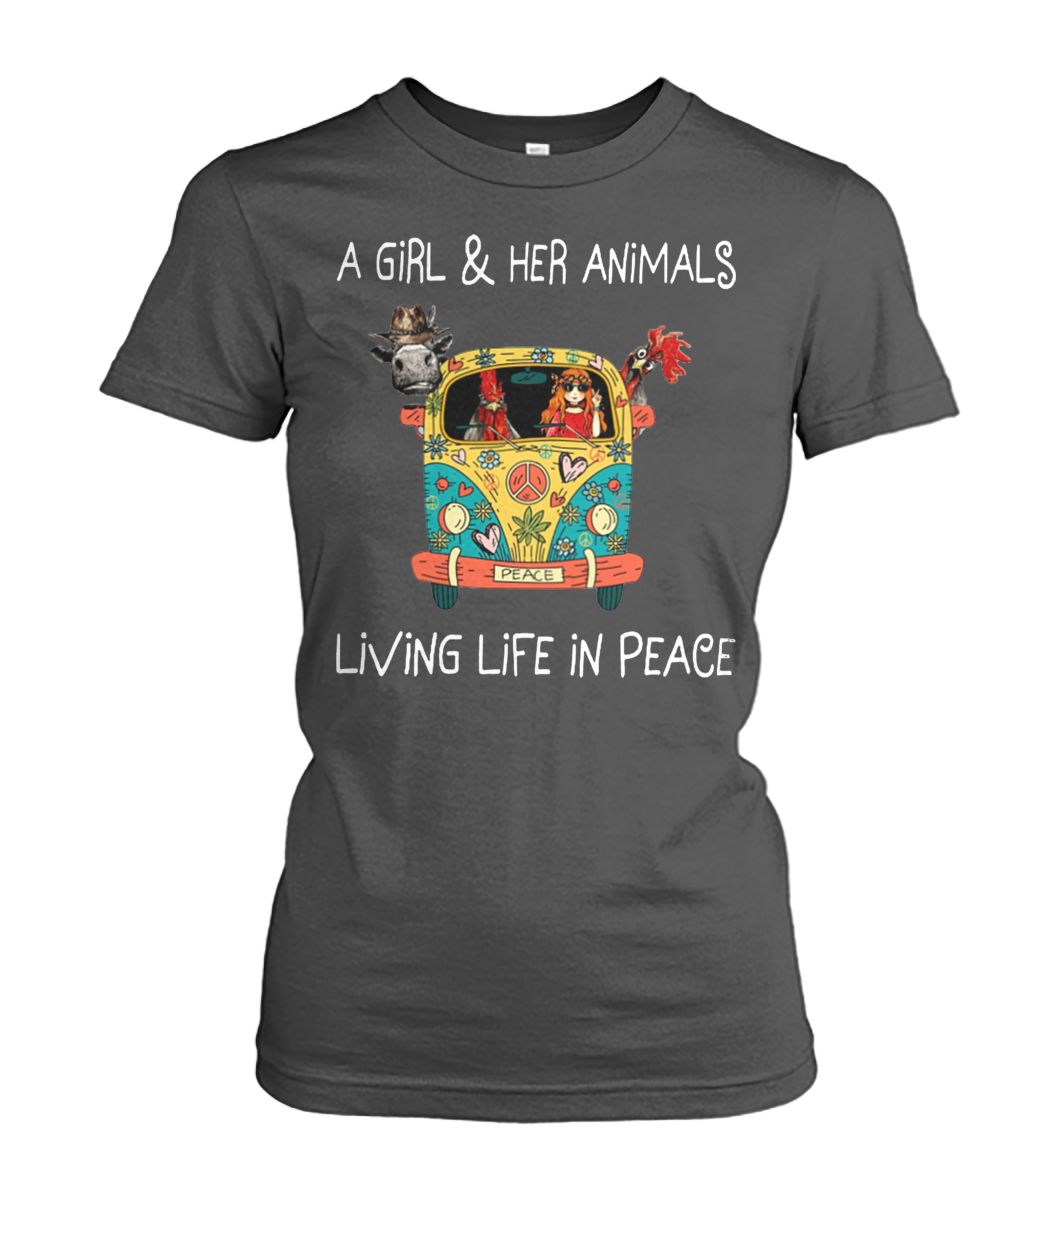 A girl and her animals living life in peace hippie women's crew tee